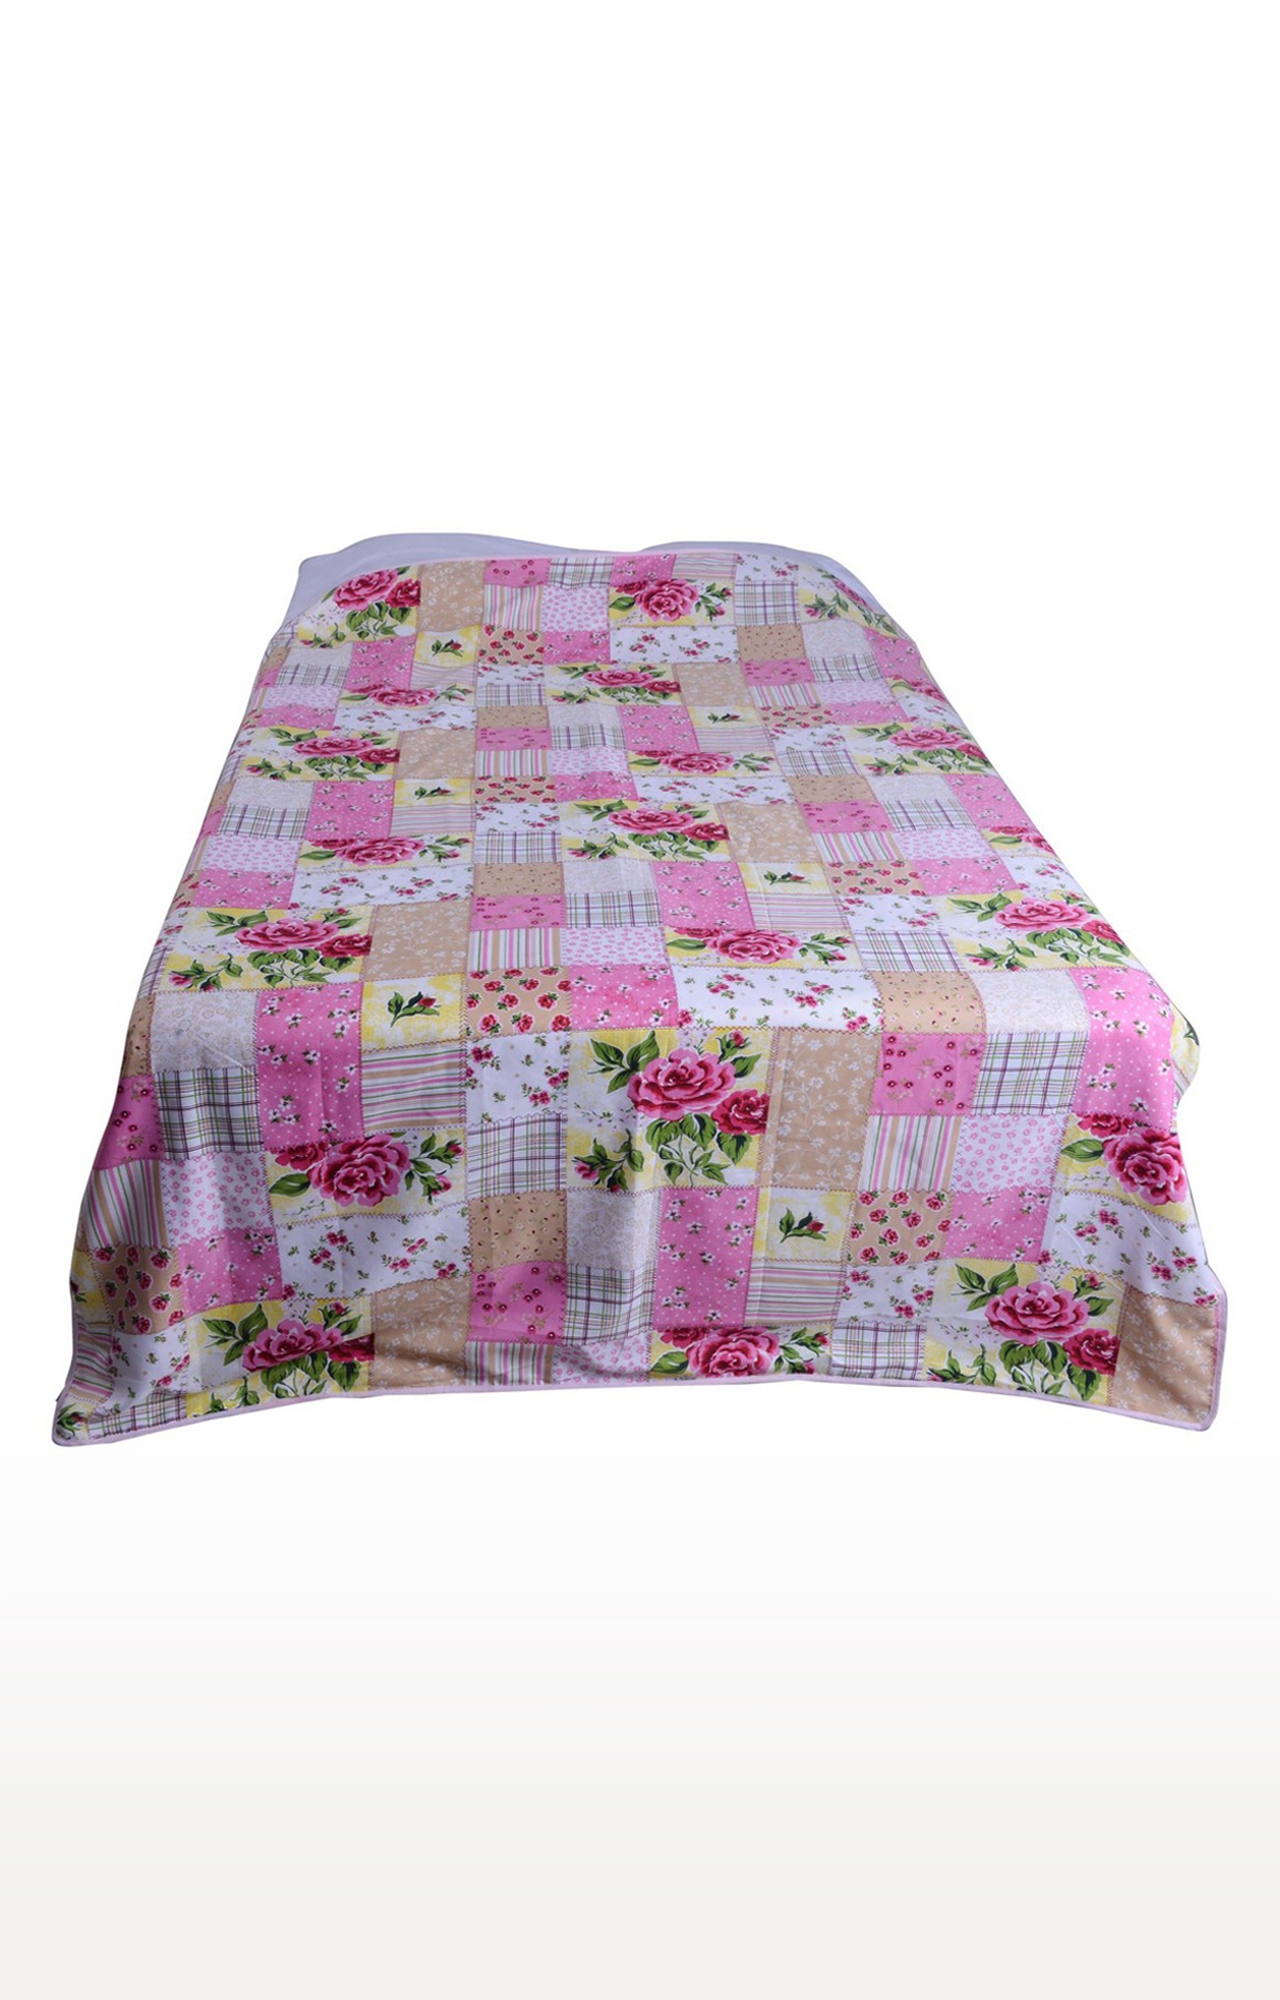 V Brown | Red Checks & Flower Printed Cotton 3 Layer Single Bed Quilt Dohar